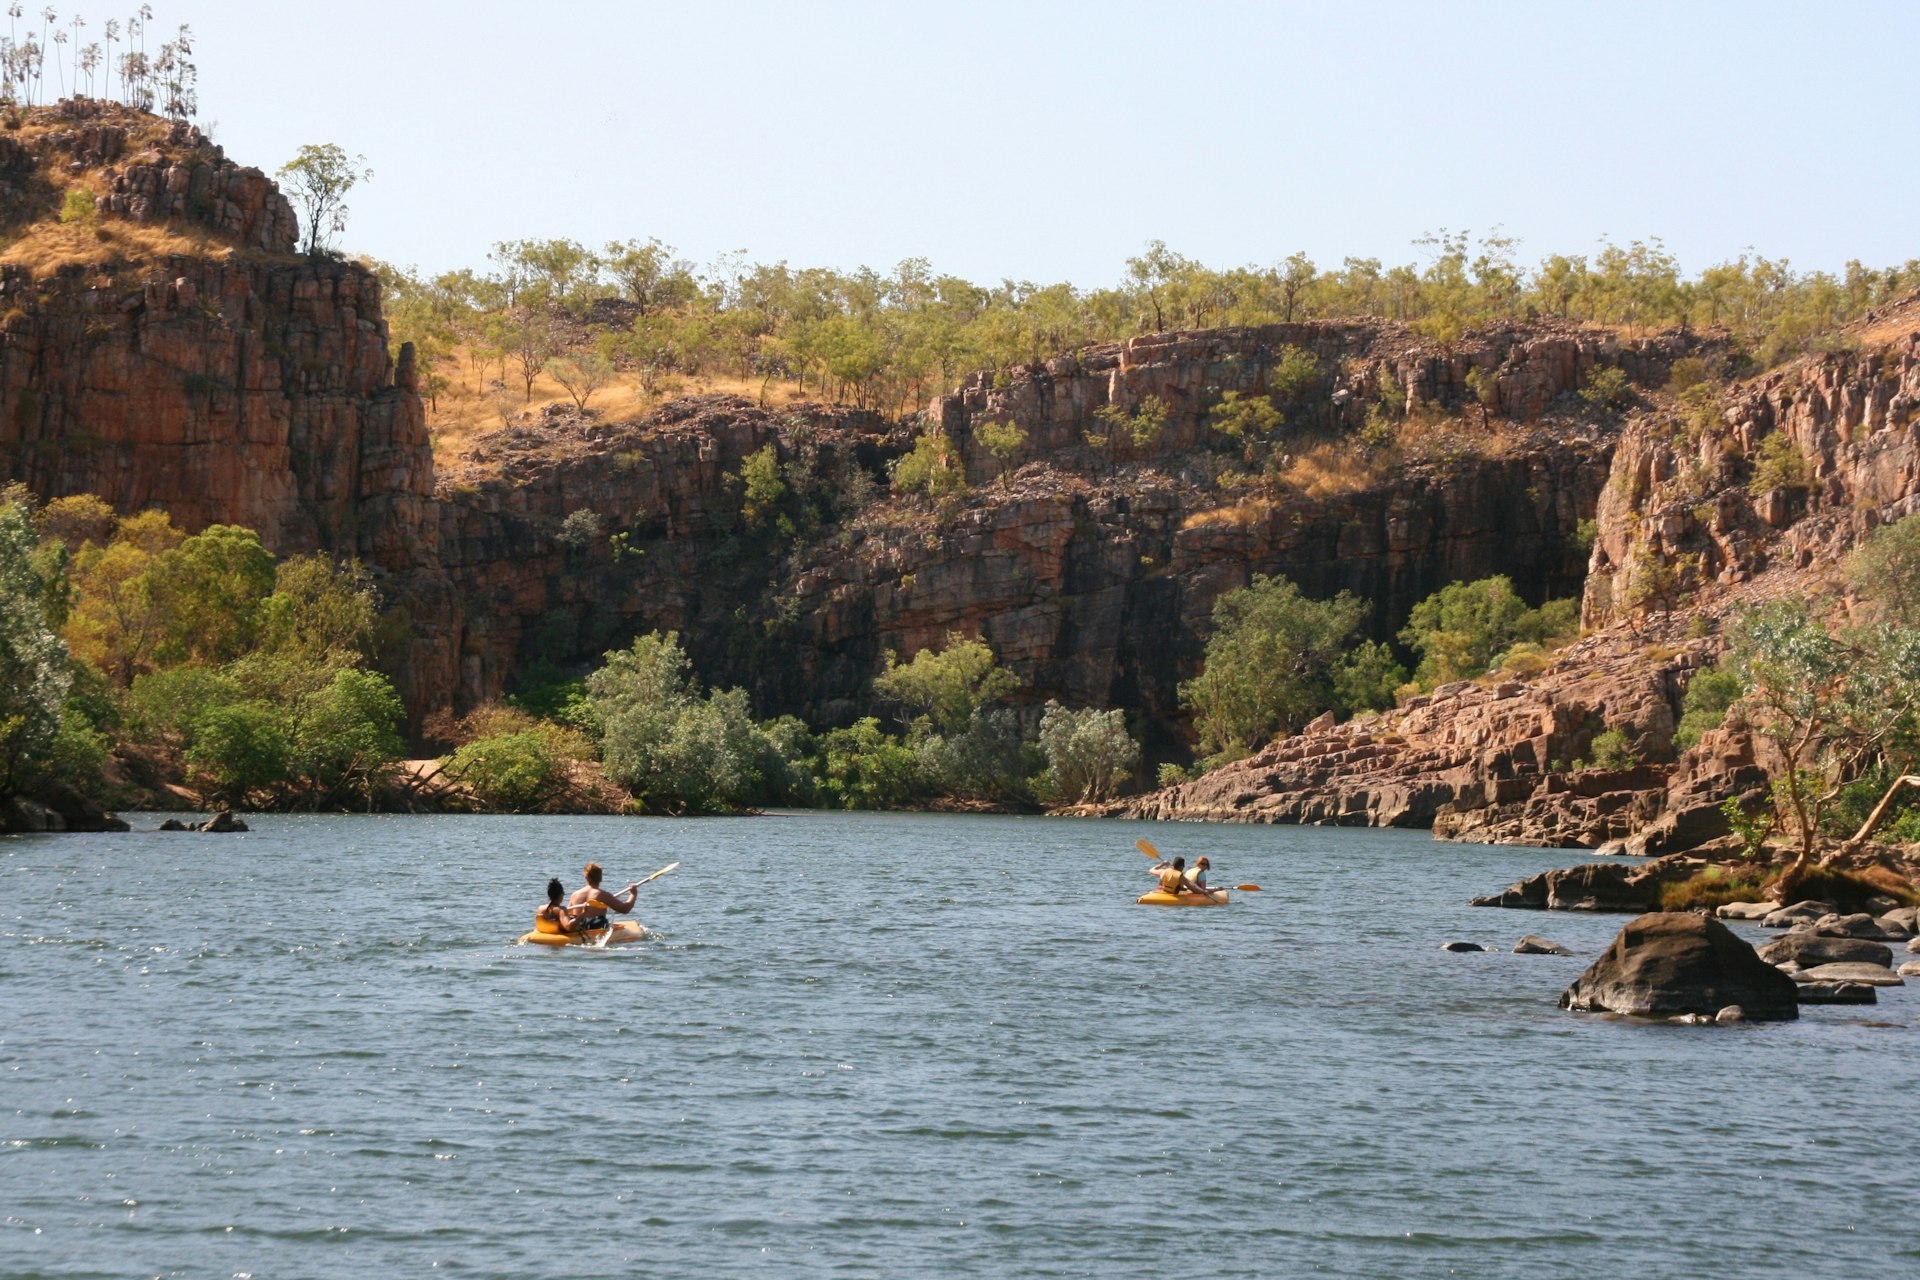 Four people paddle along in small canoes in a water-filled gorge on a sunny day